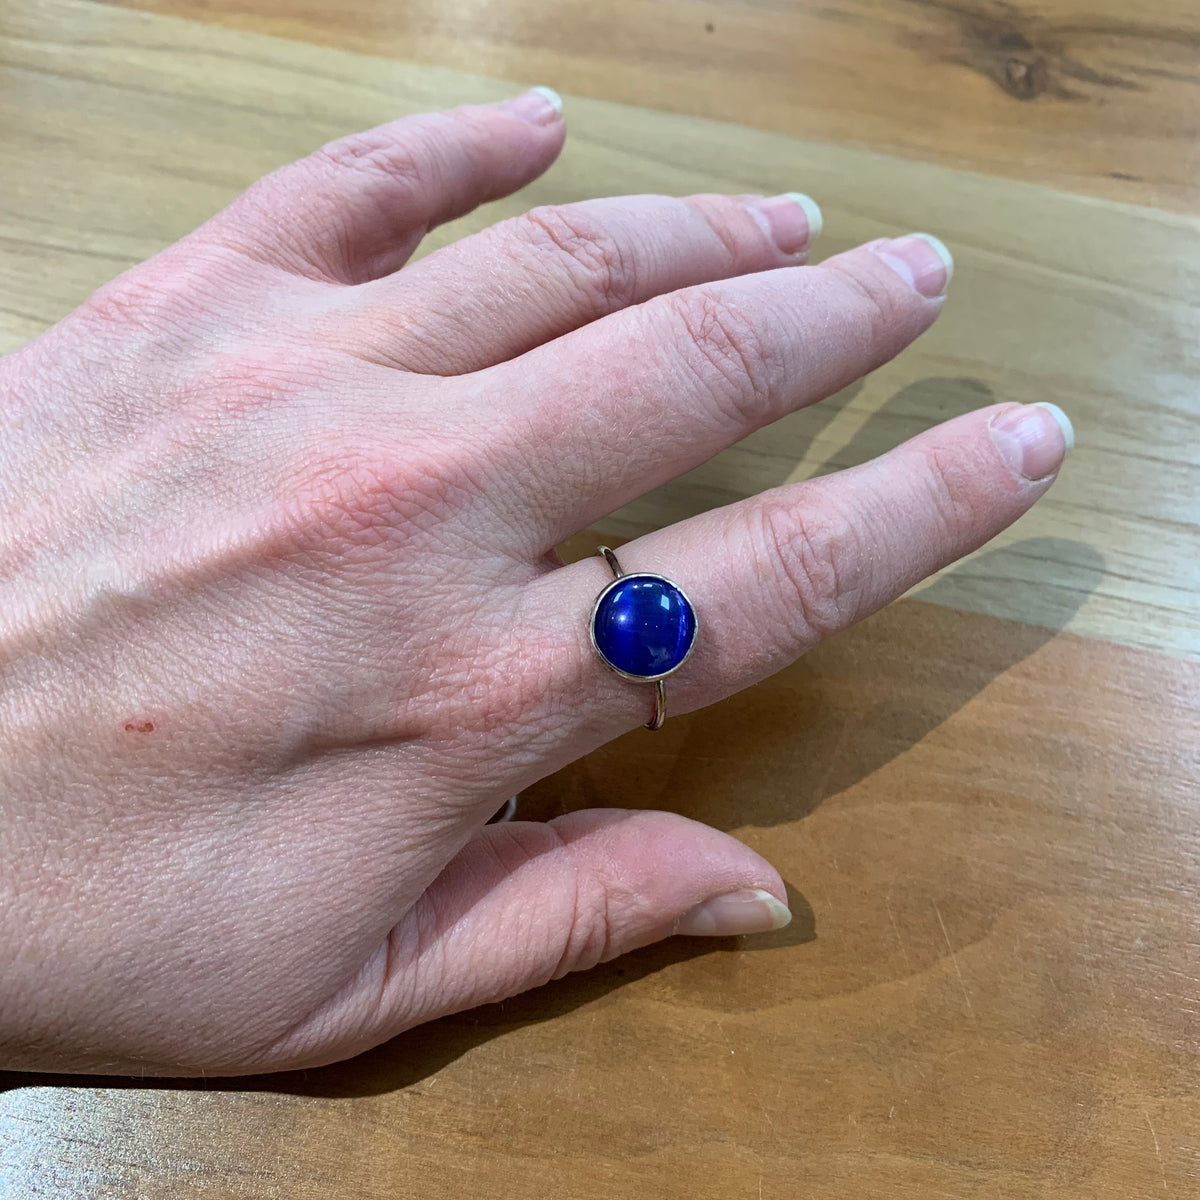 Woman wearing ring with large blue round stone